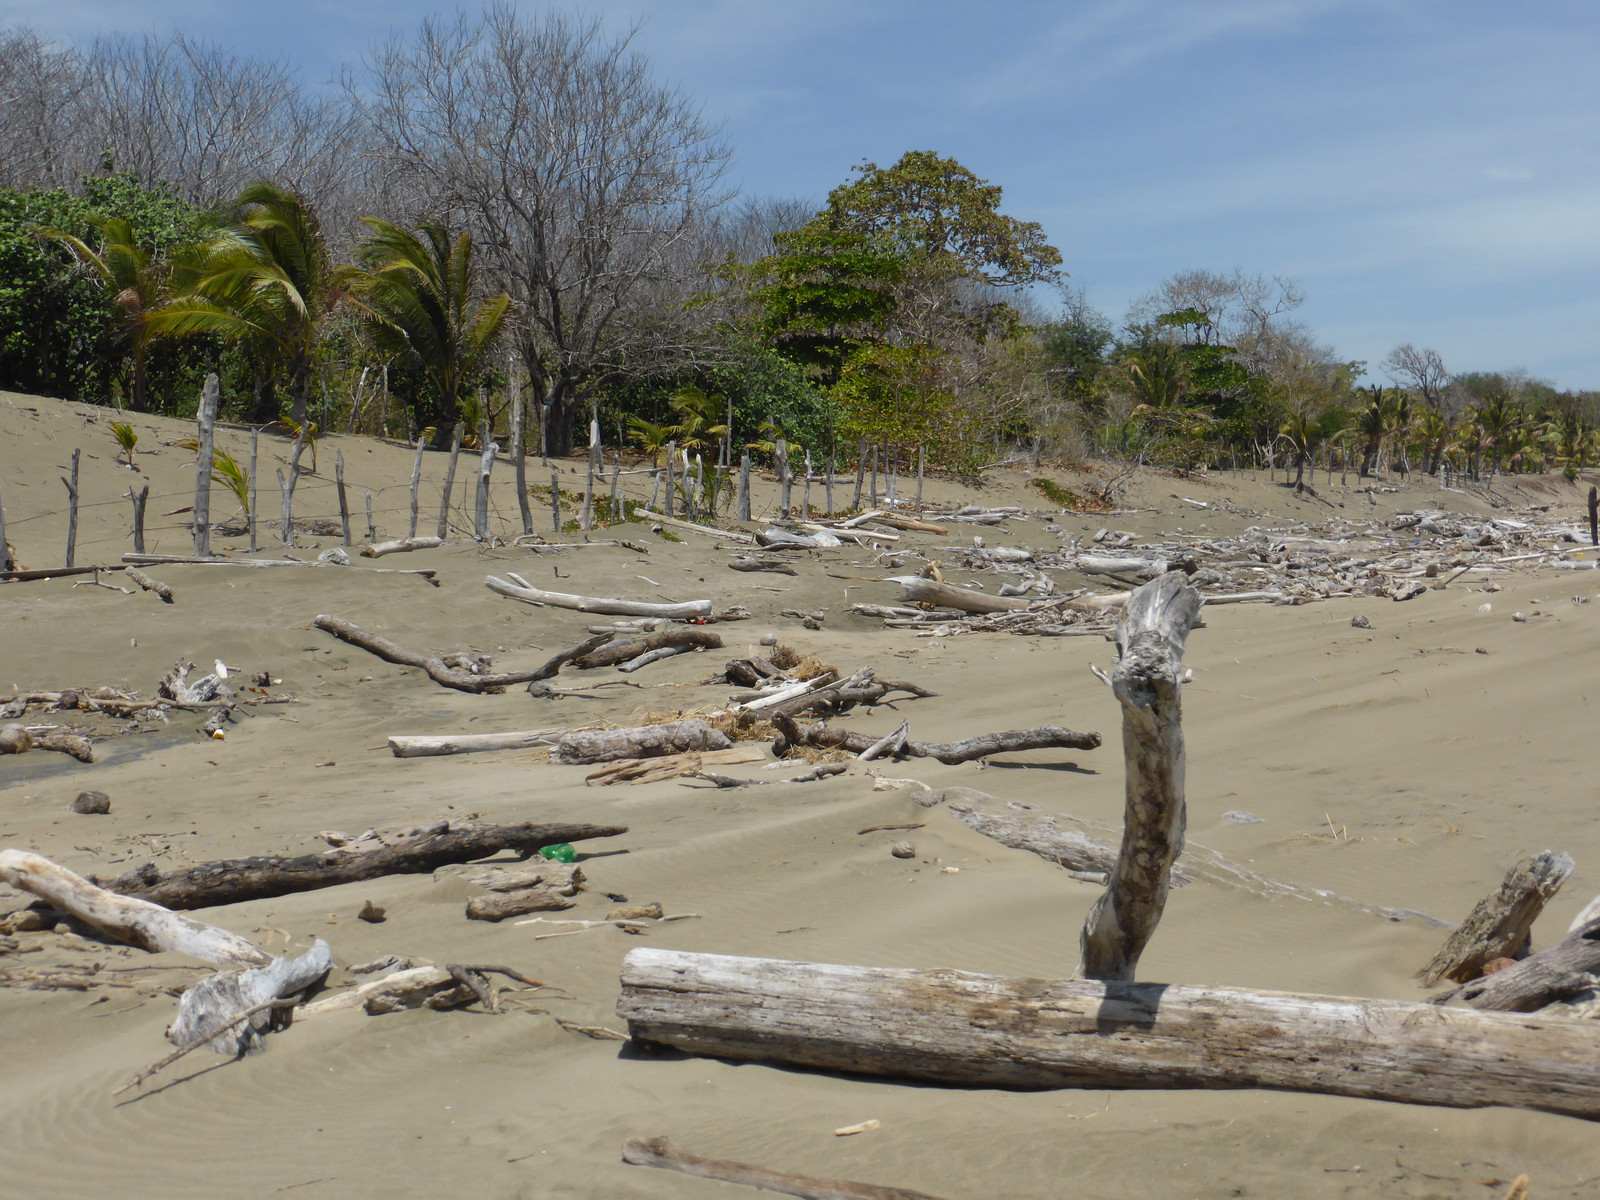 The Peninsula de Azuero is a dry part of the world, and the beaches can feel a bit like deserts